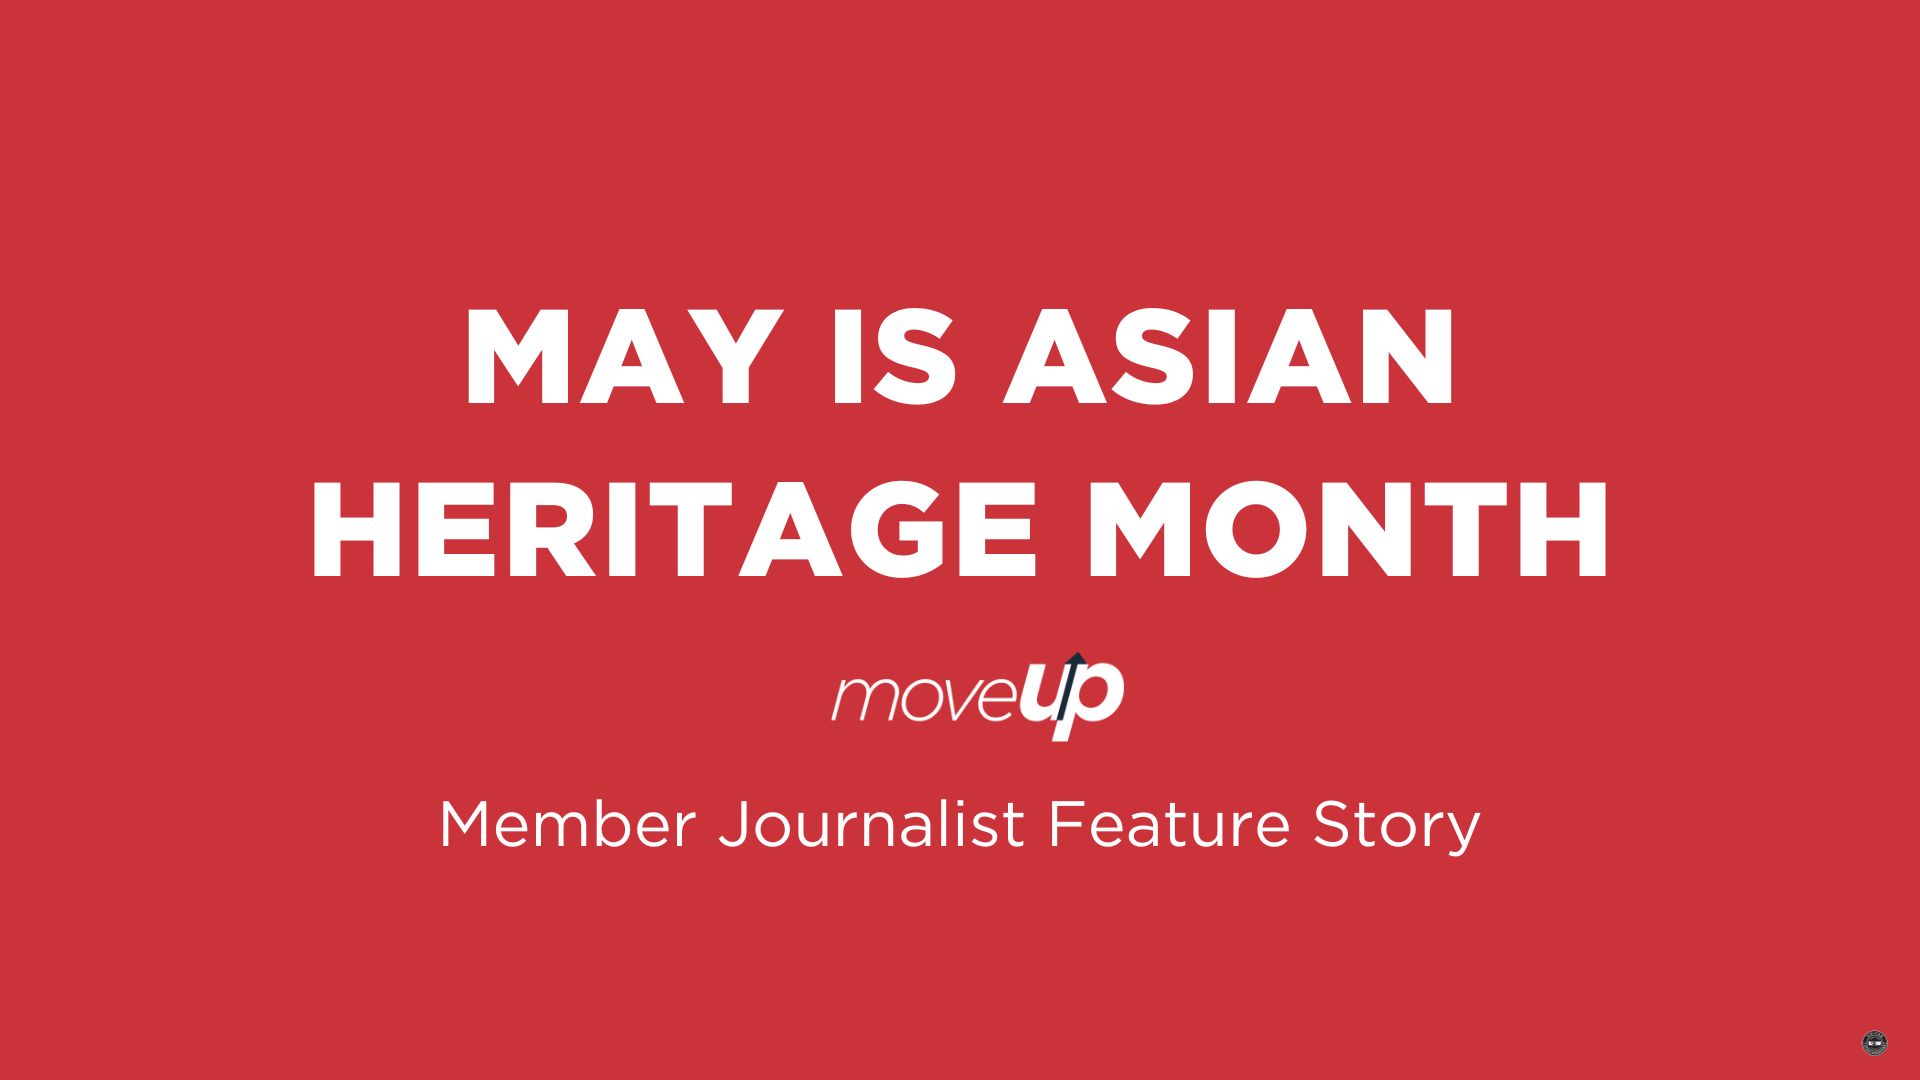 May is Asian Heritage Month